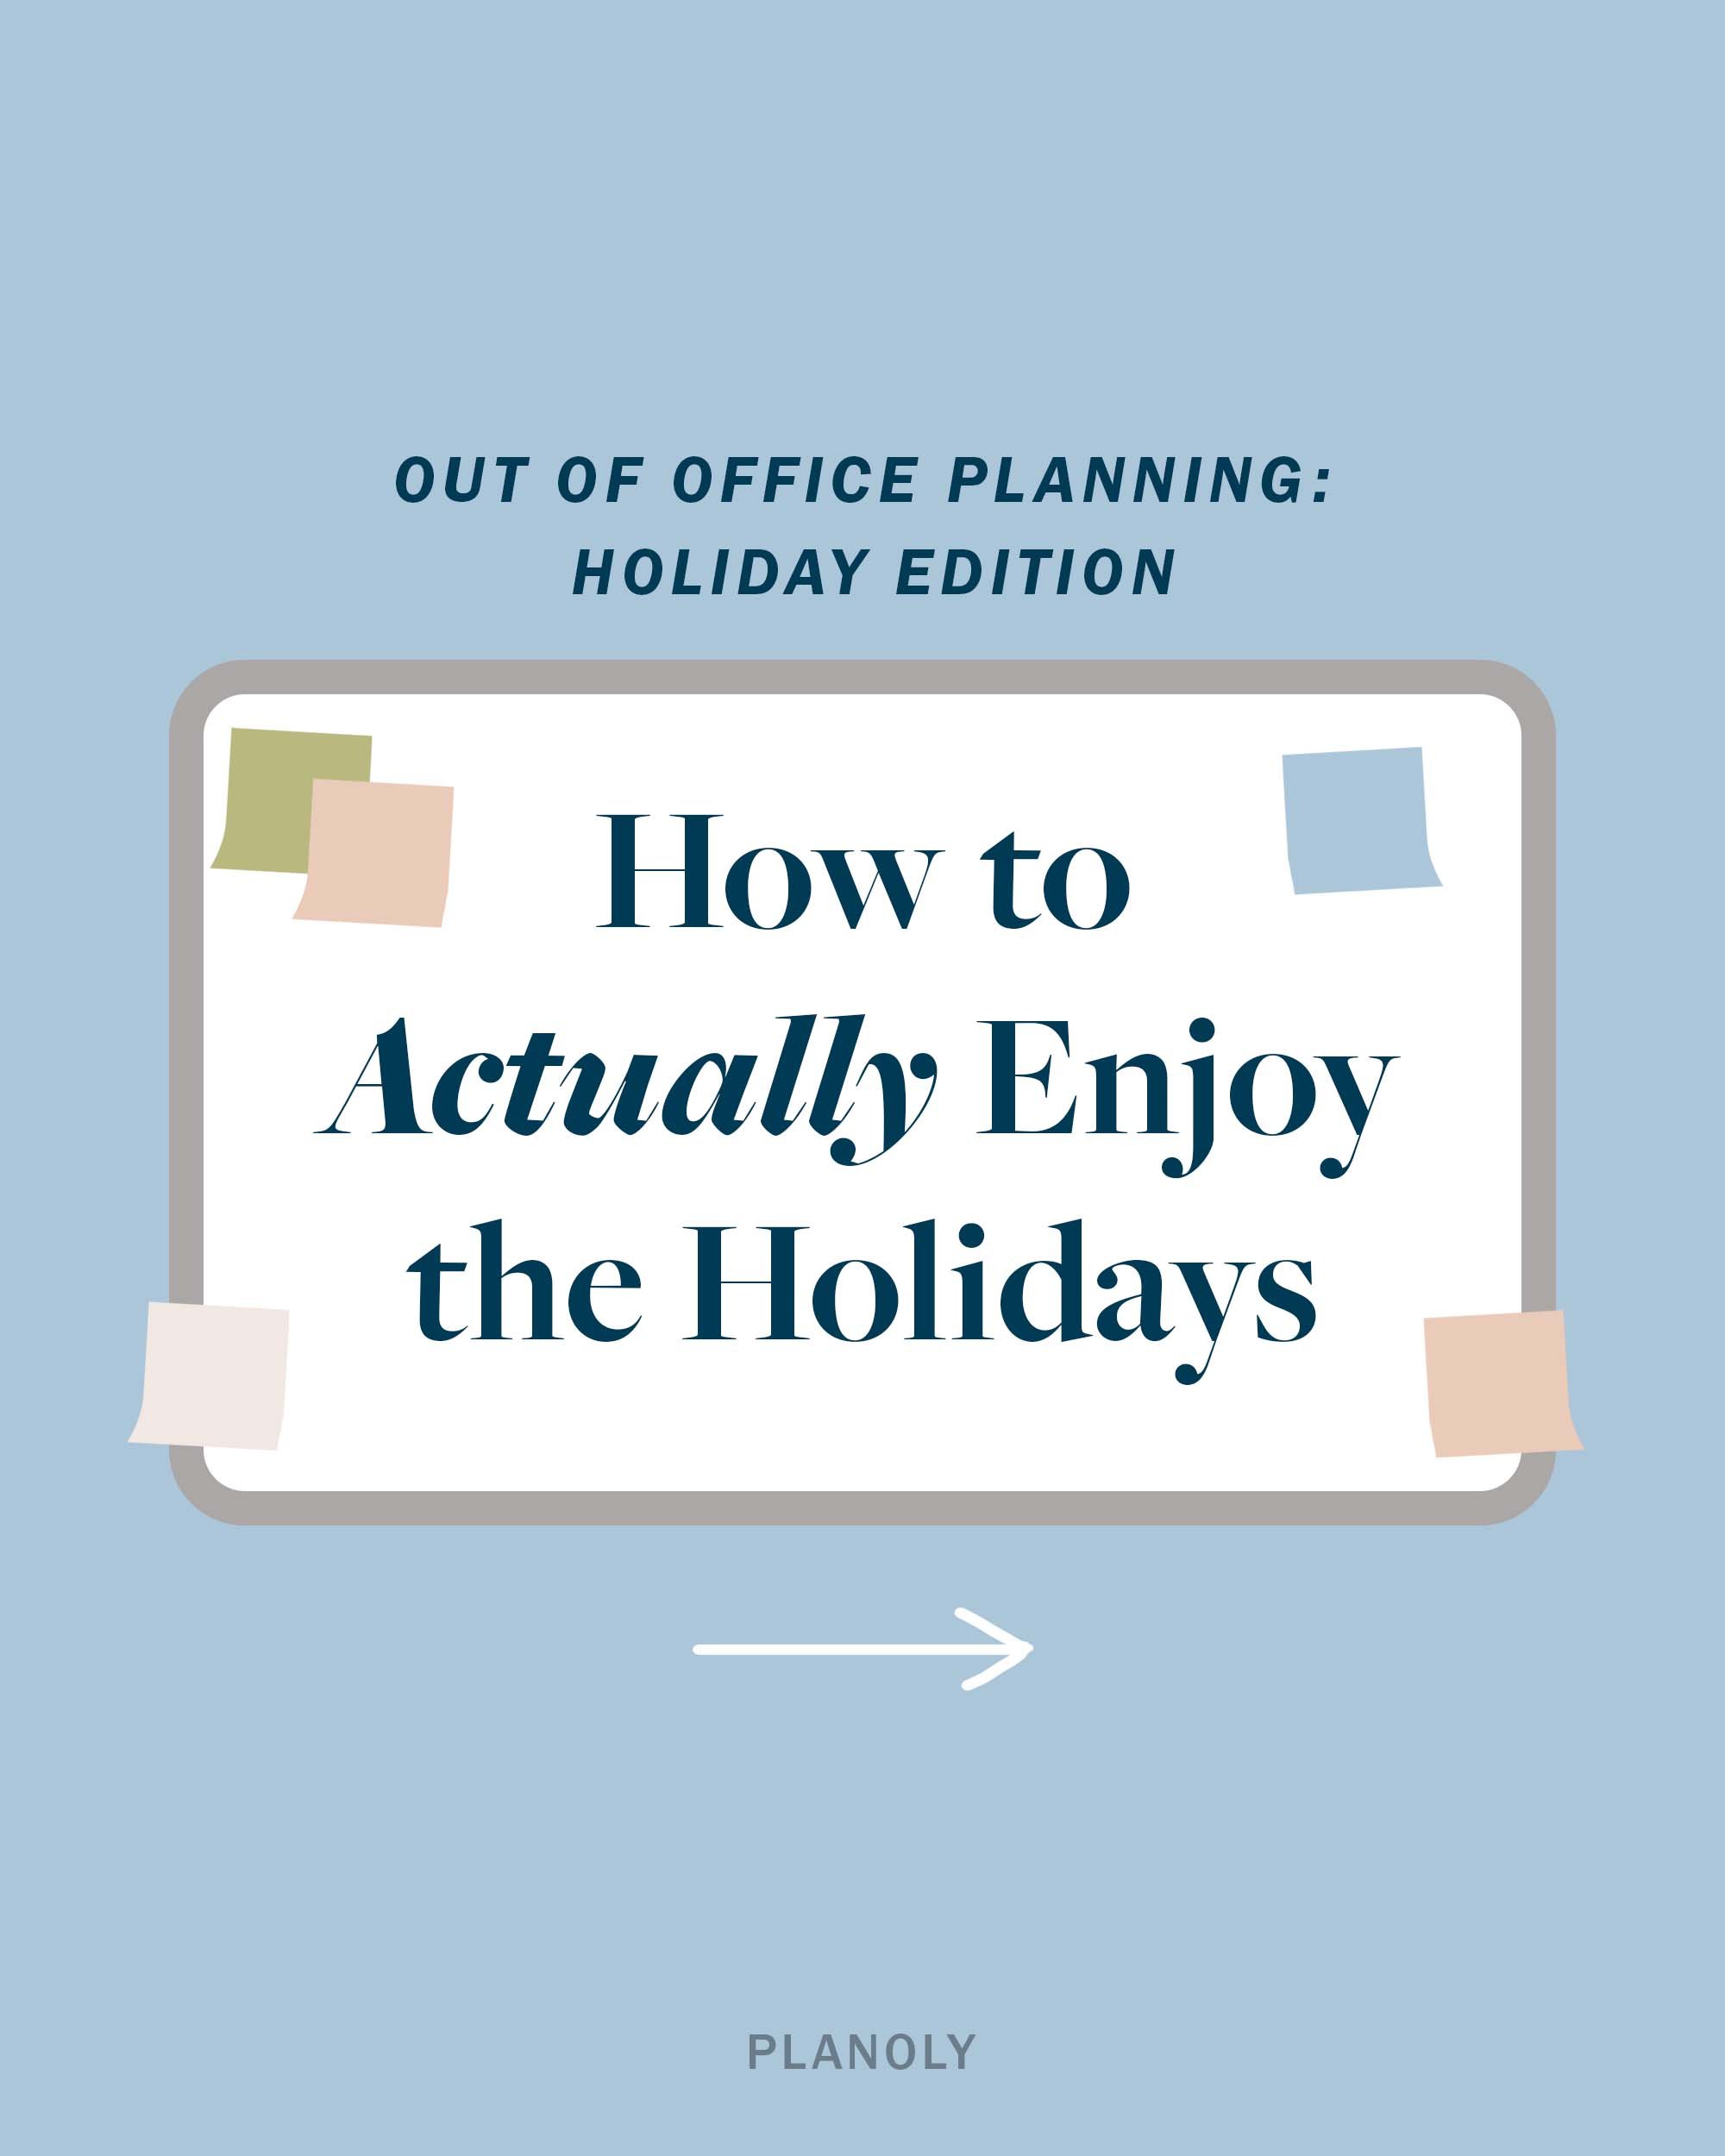 Marketing Best Practices_Planning Tips_OOO Planning for the Holidays_IG Grid_Nov 22_01.jpg